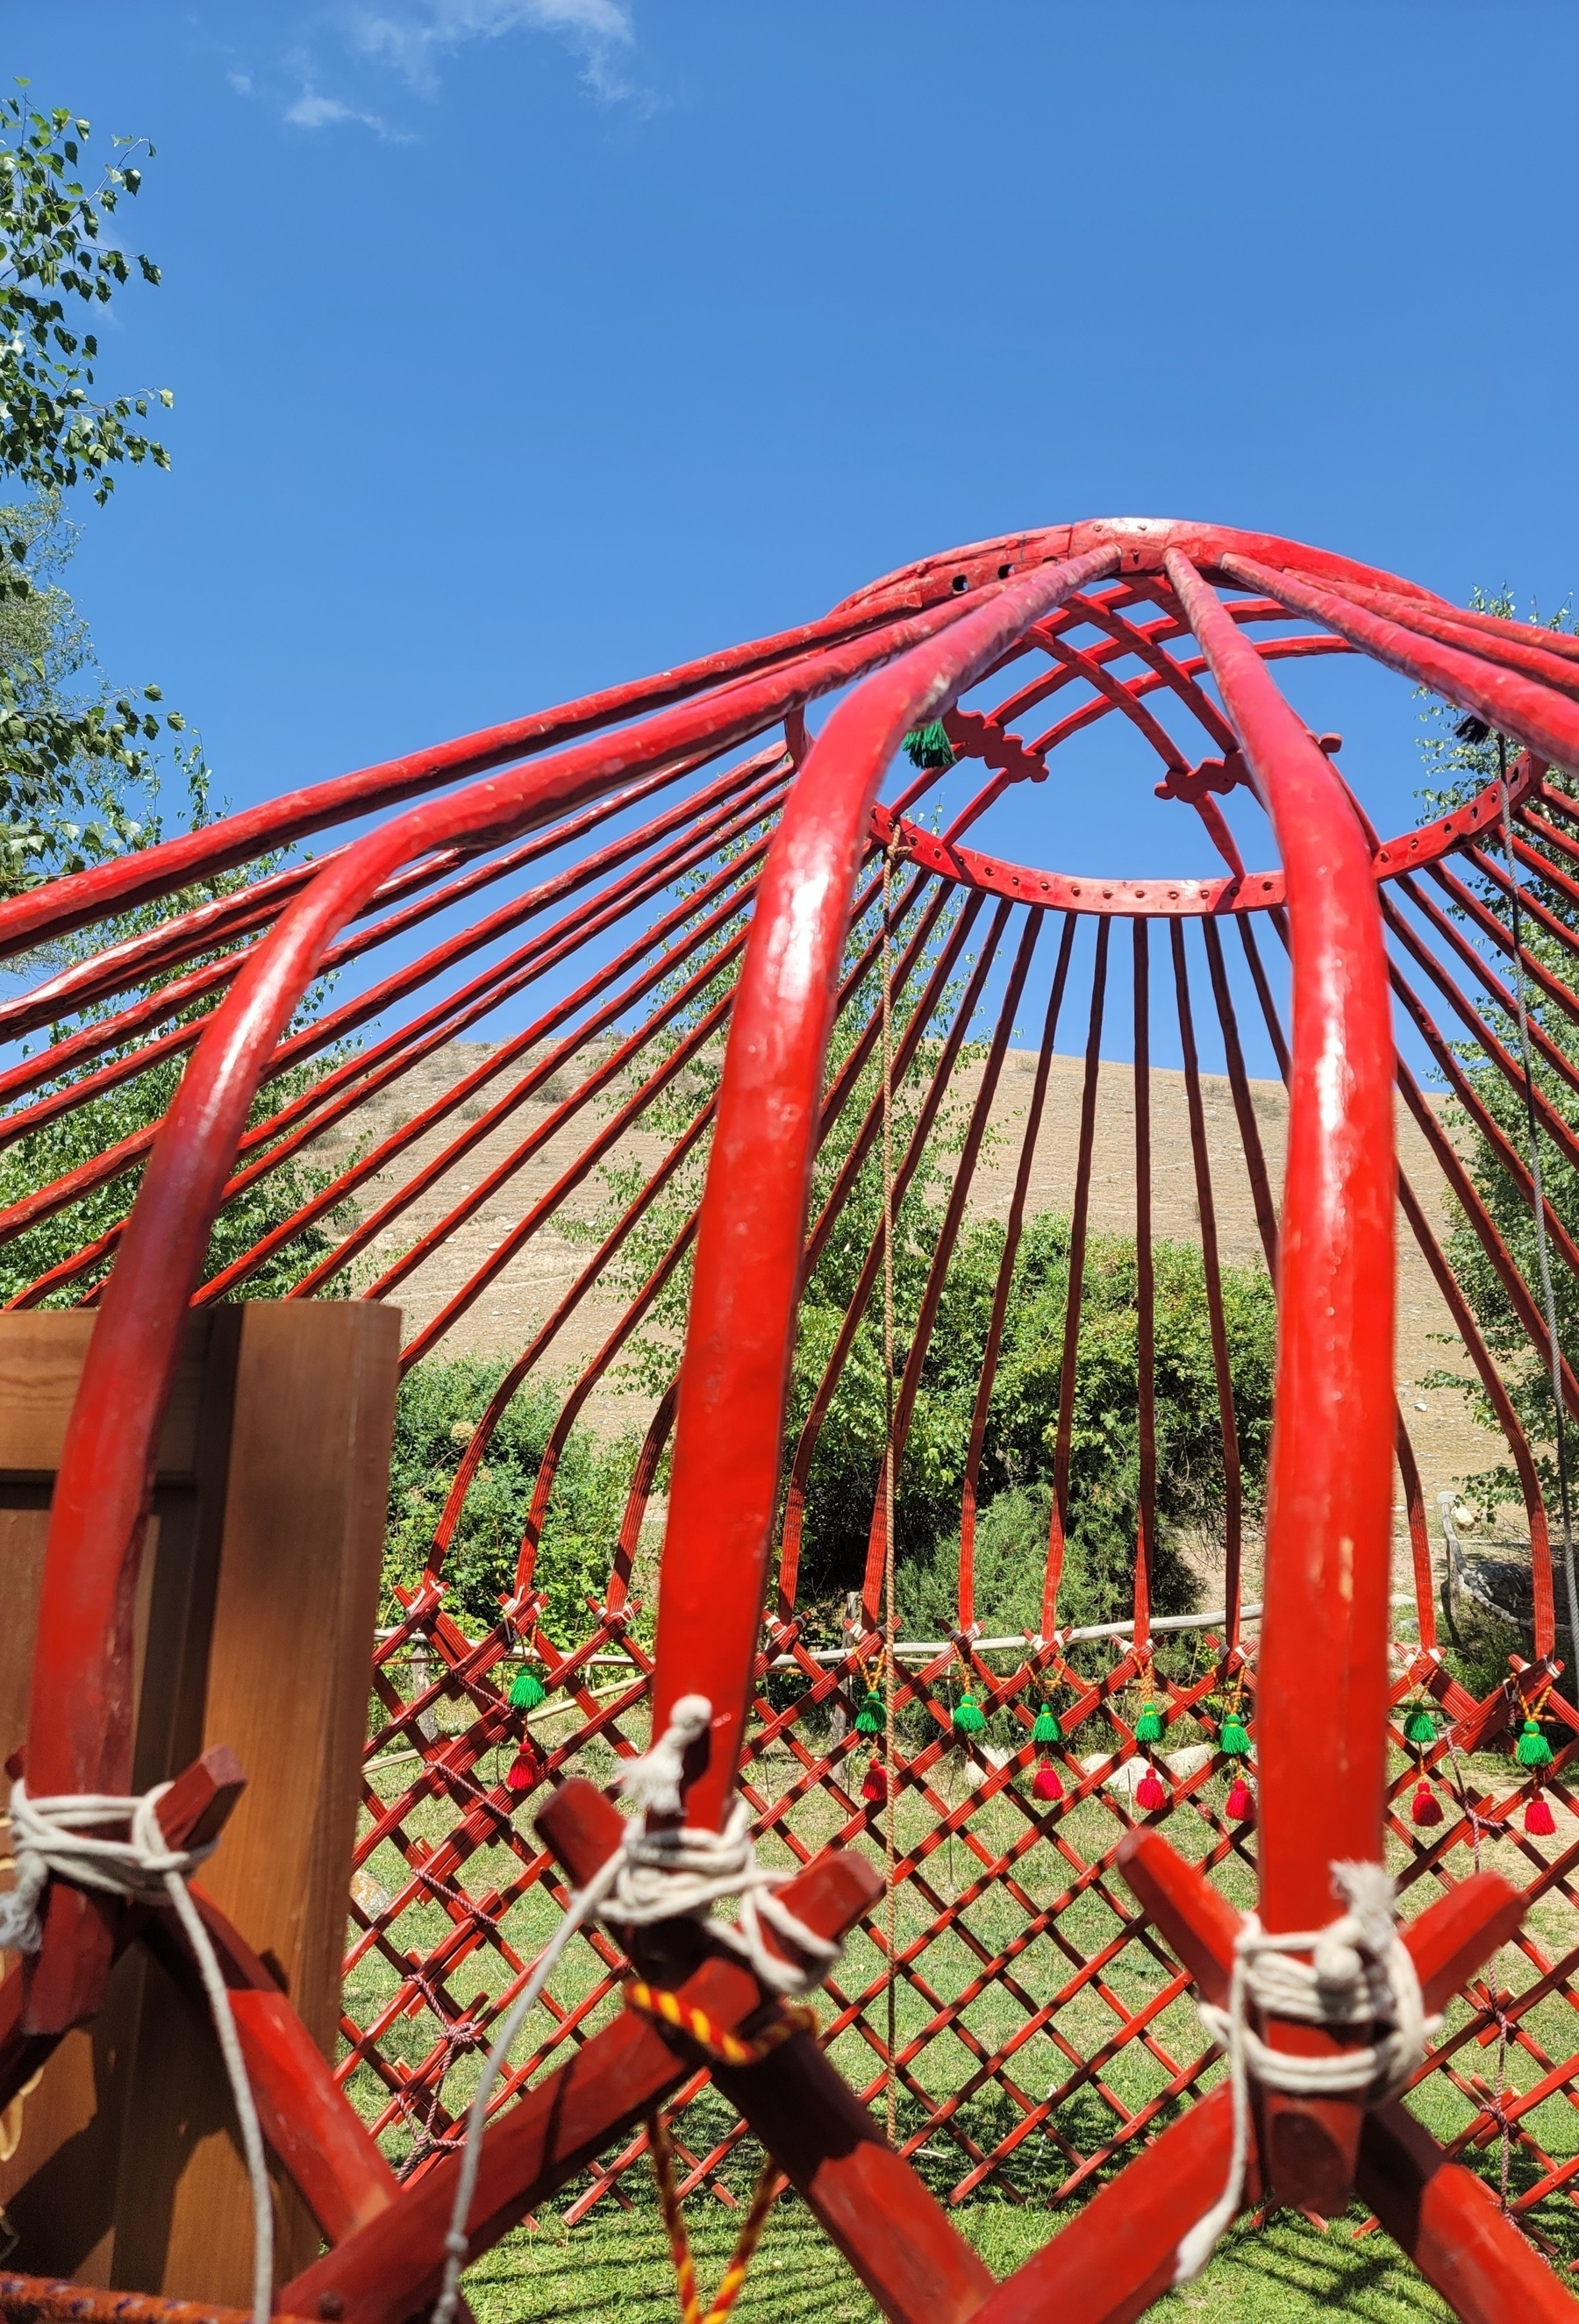 assembled red skeleton of a yurt without any felt coverings